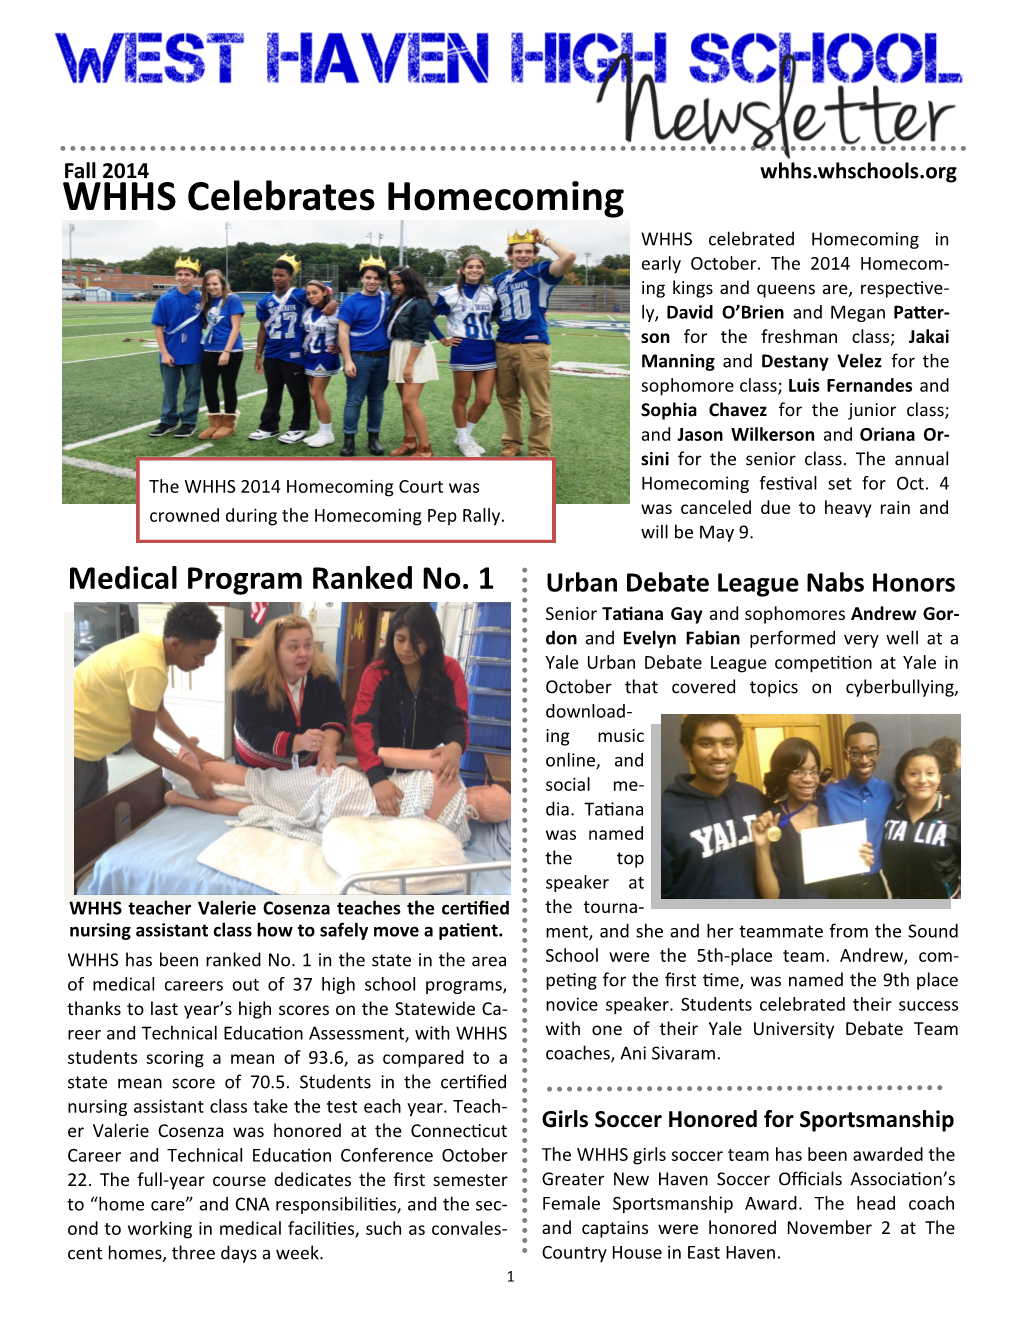 WHHS Celebrates Homecoming WHHS Celebrated Homecoming in Early October